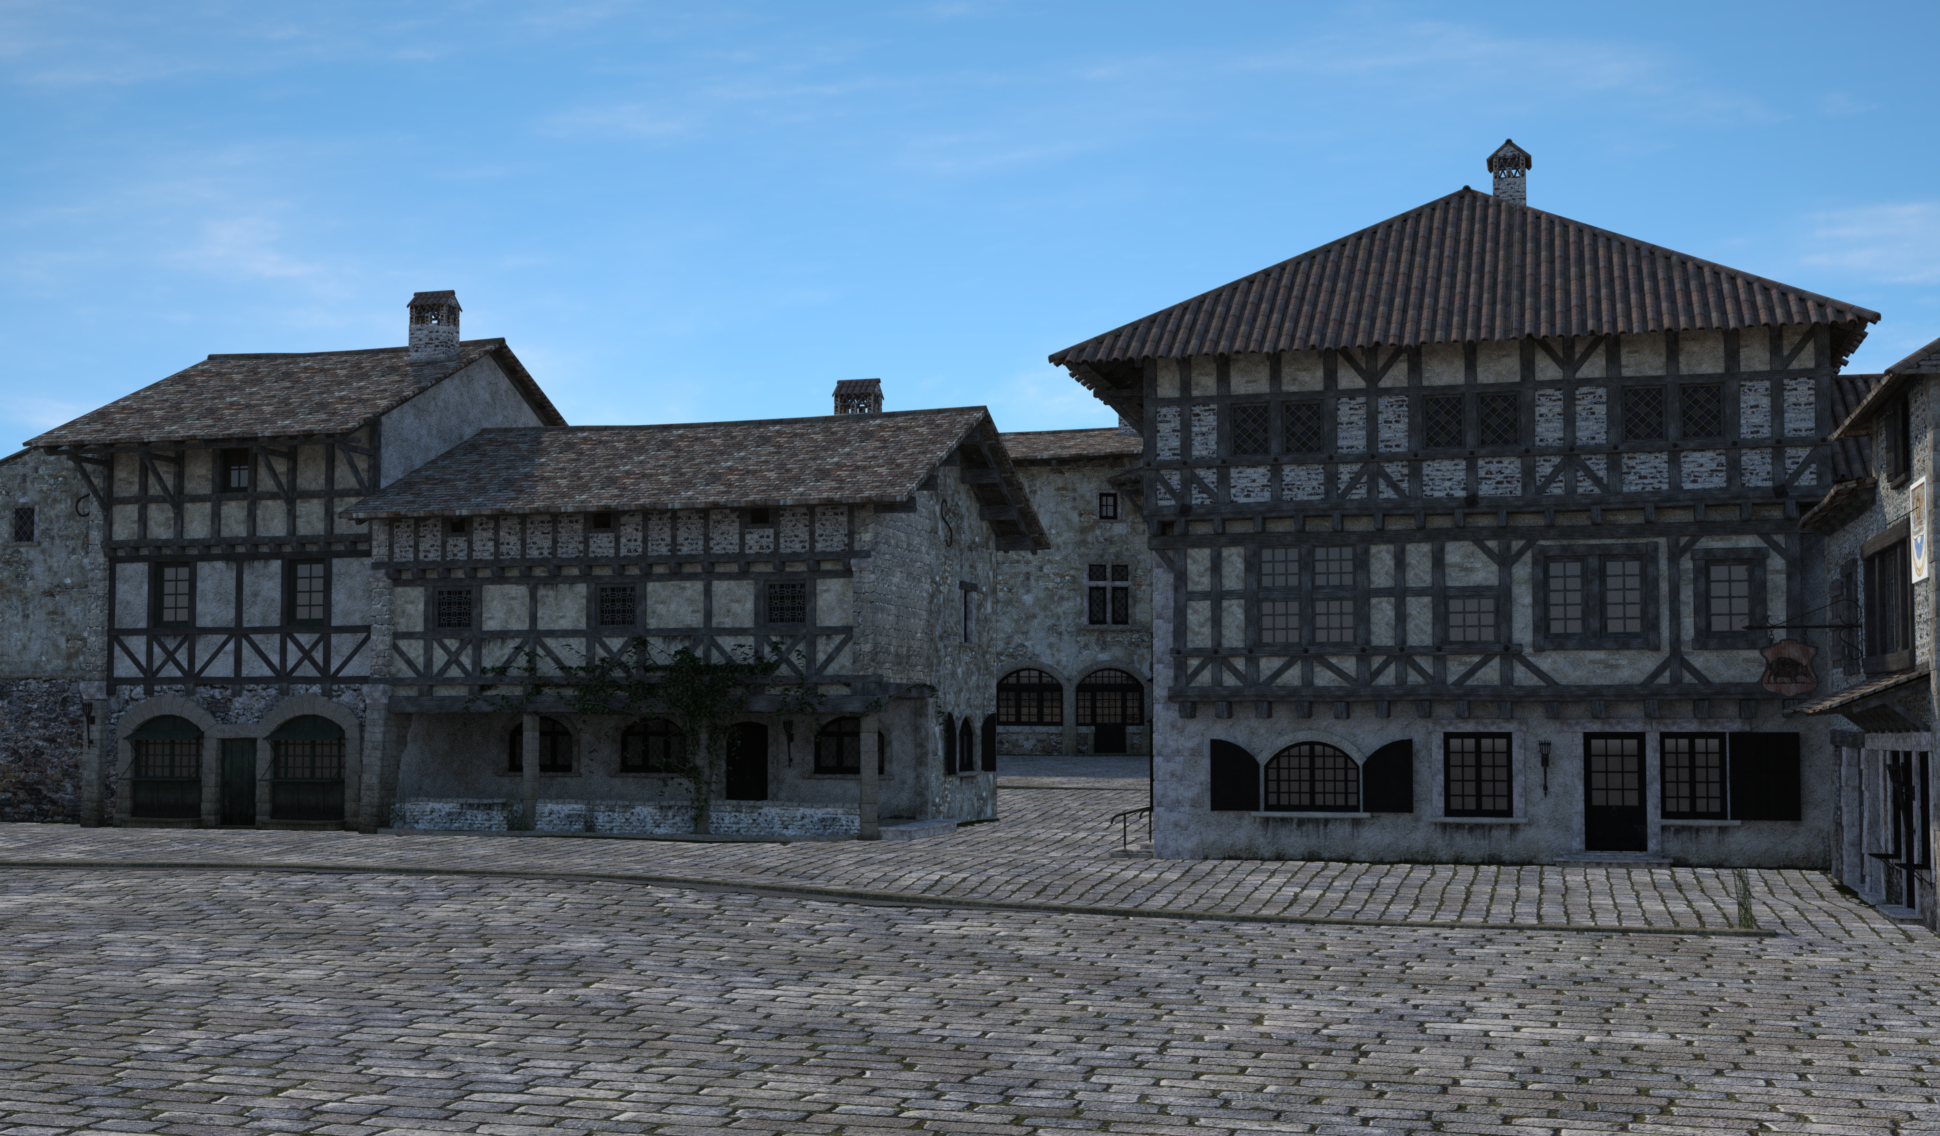 EXT. MEDIEVAL VILLAGE 2 – DAY